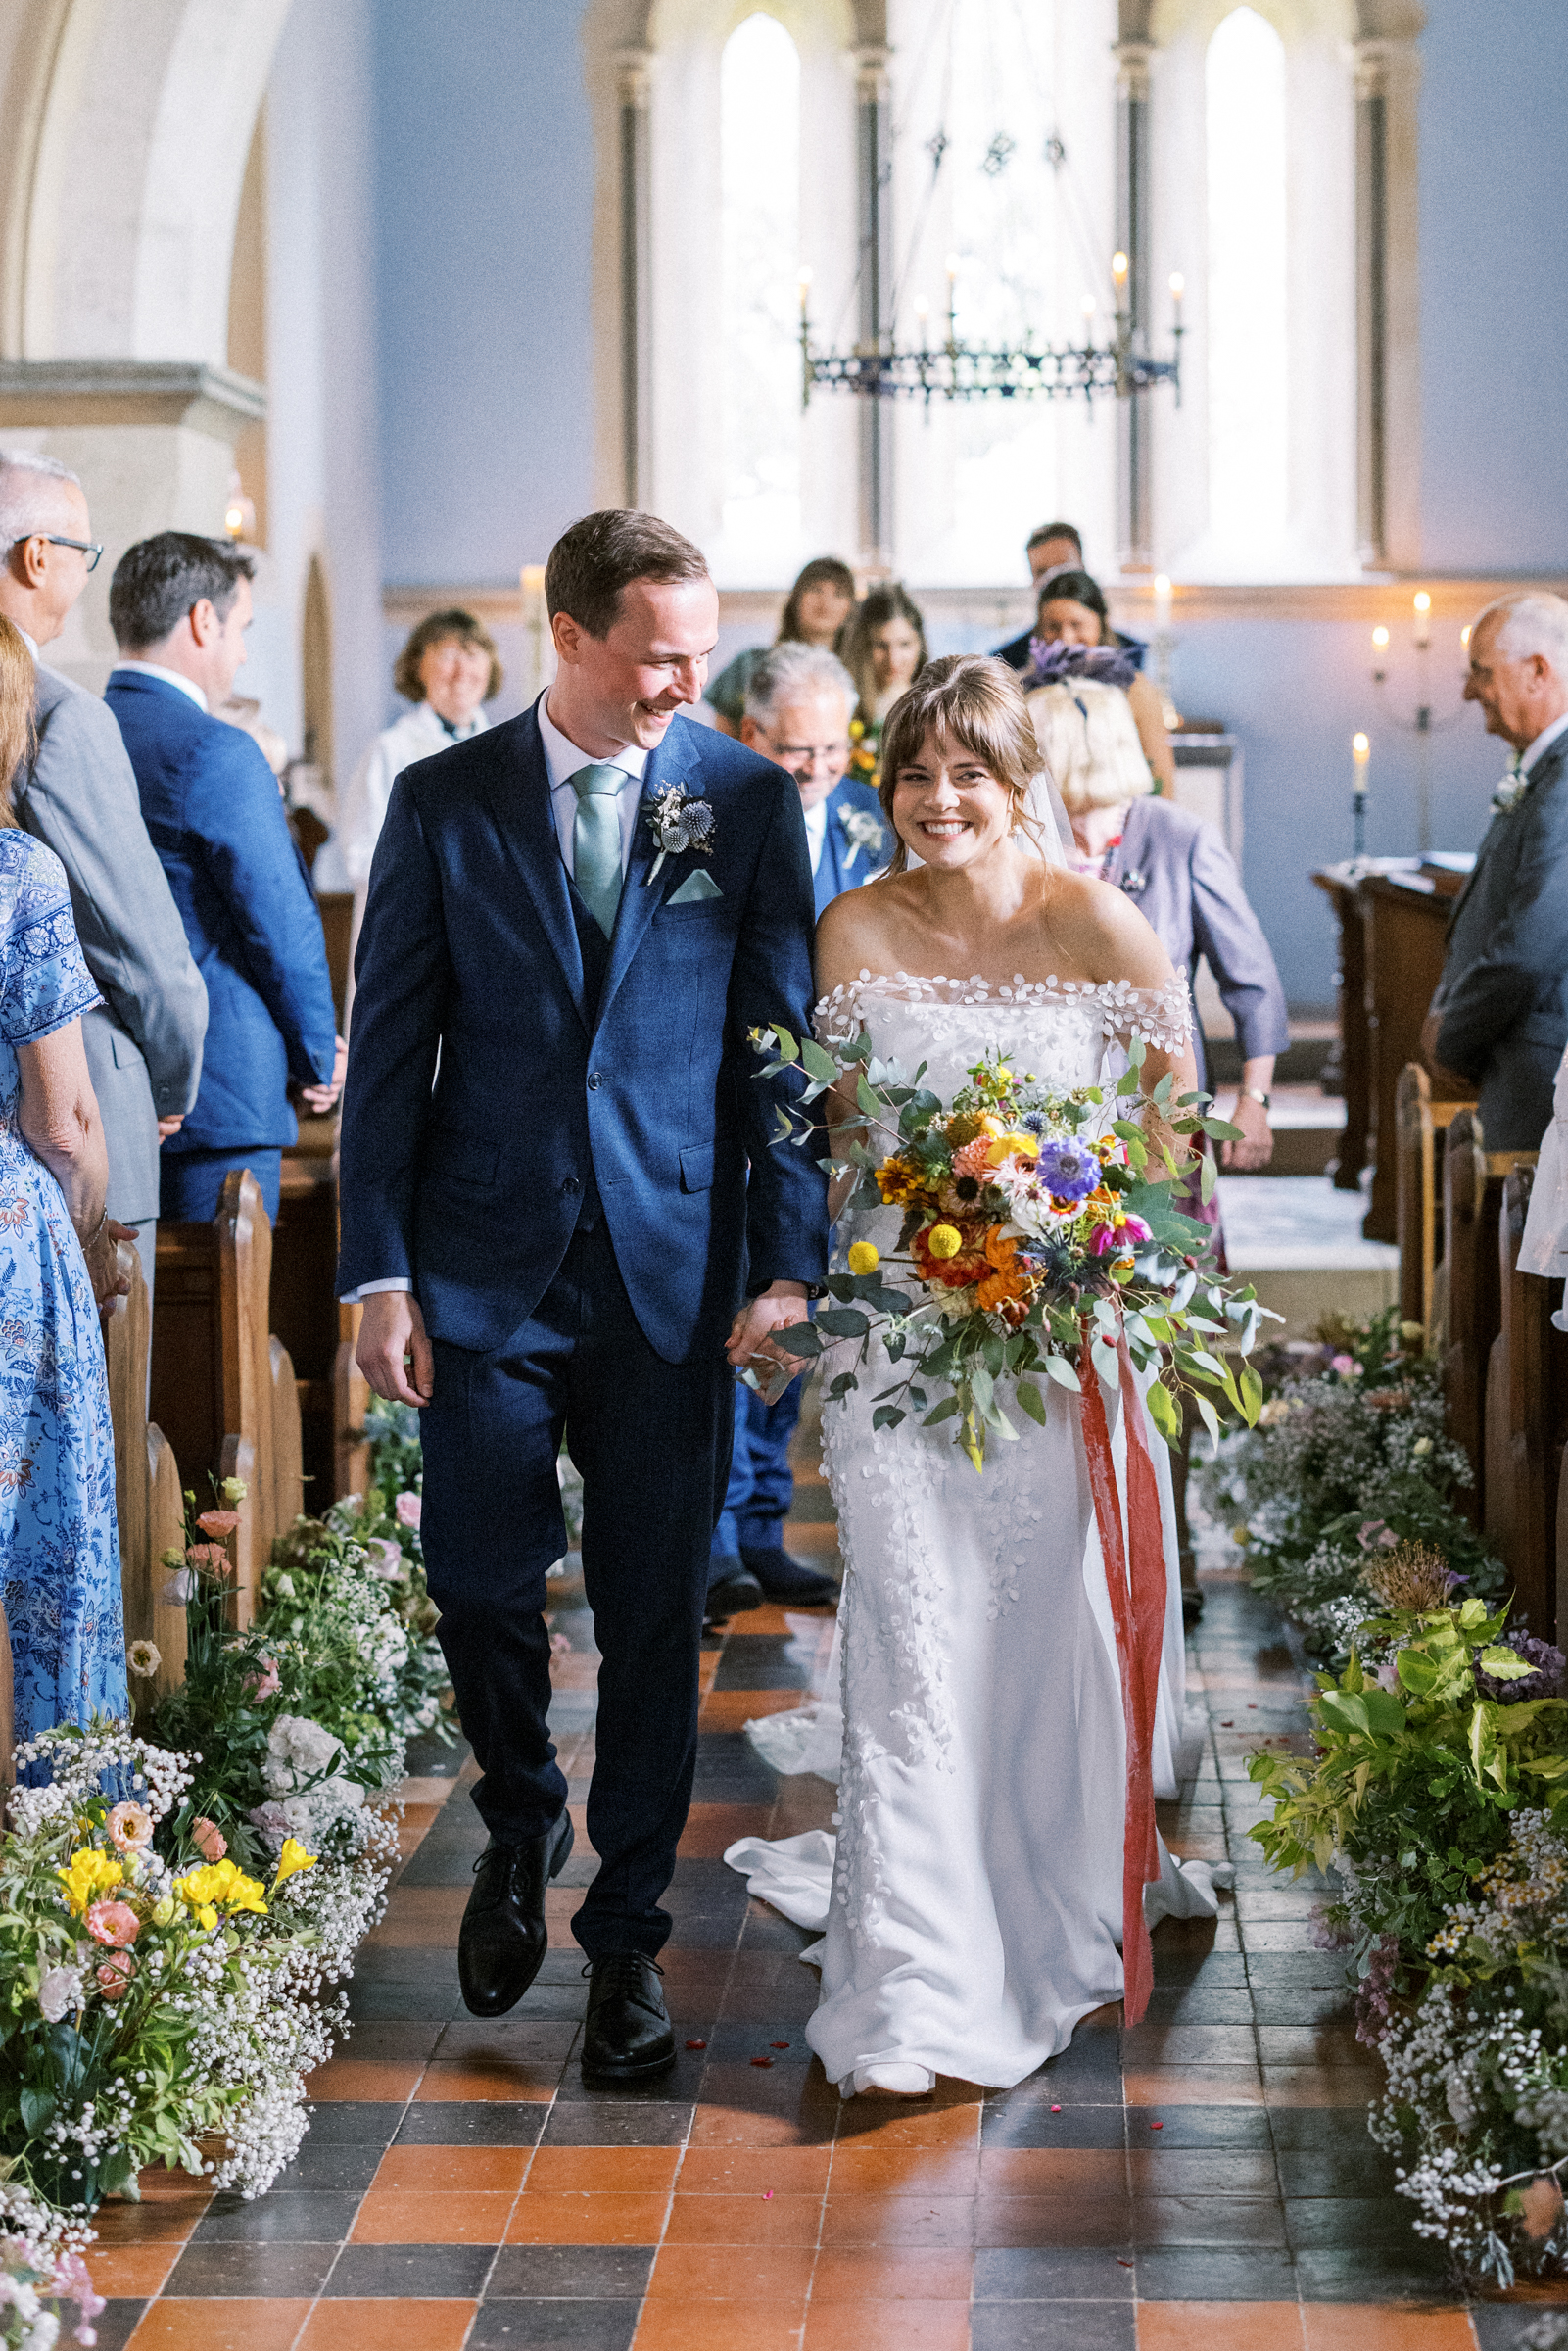 Bride & Groom leave South Stoke Barn Wedding Church after getting married